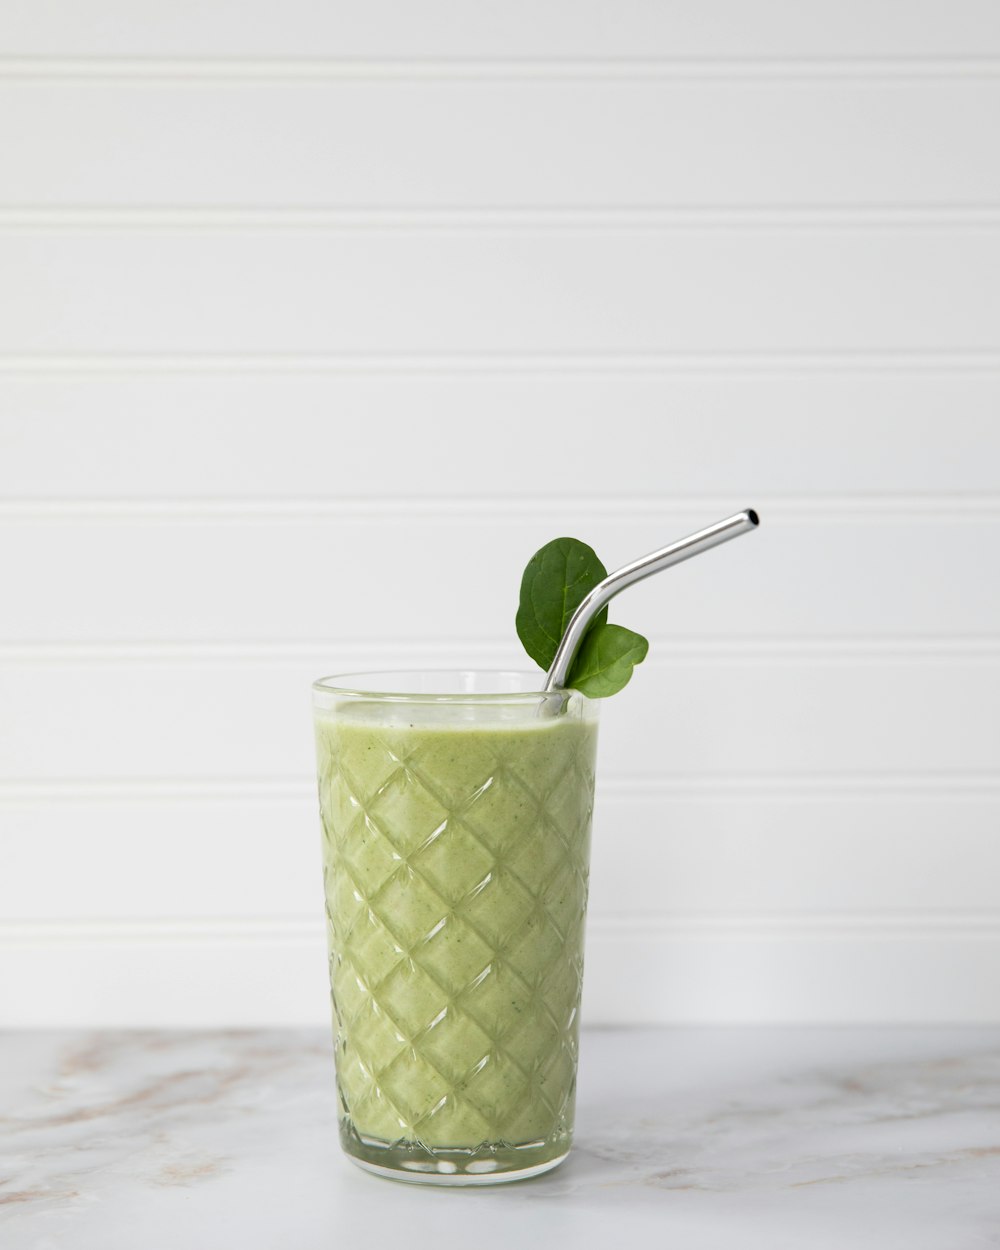 green and white drink with straw in clear drinking glass